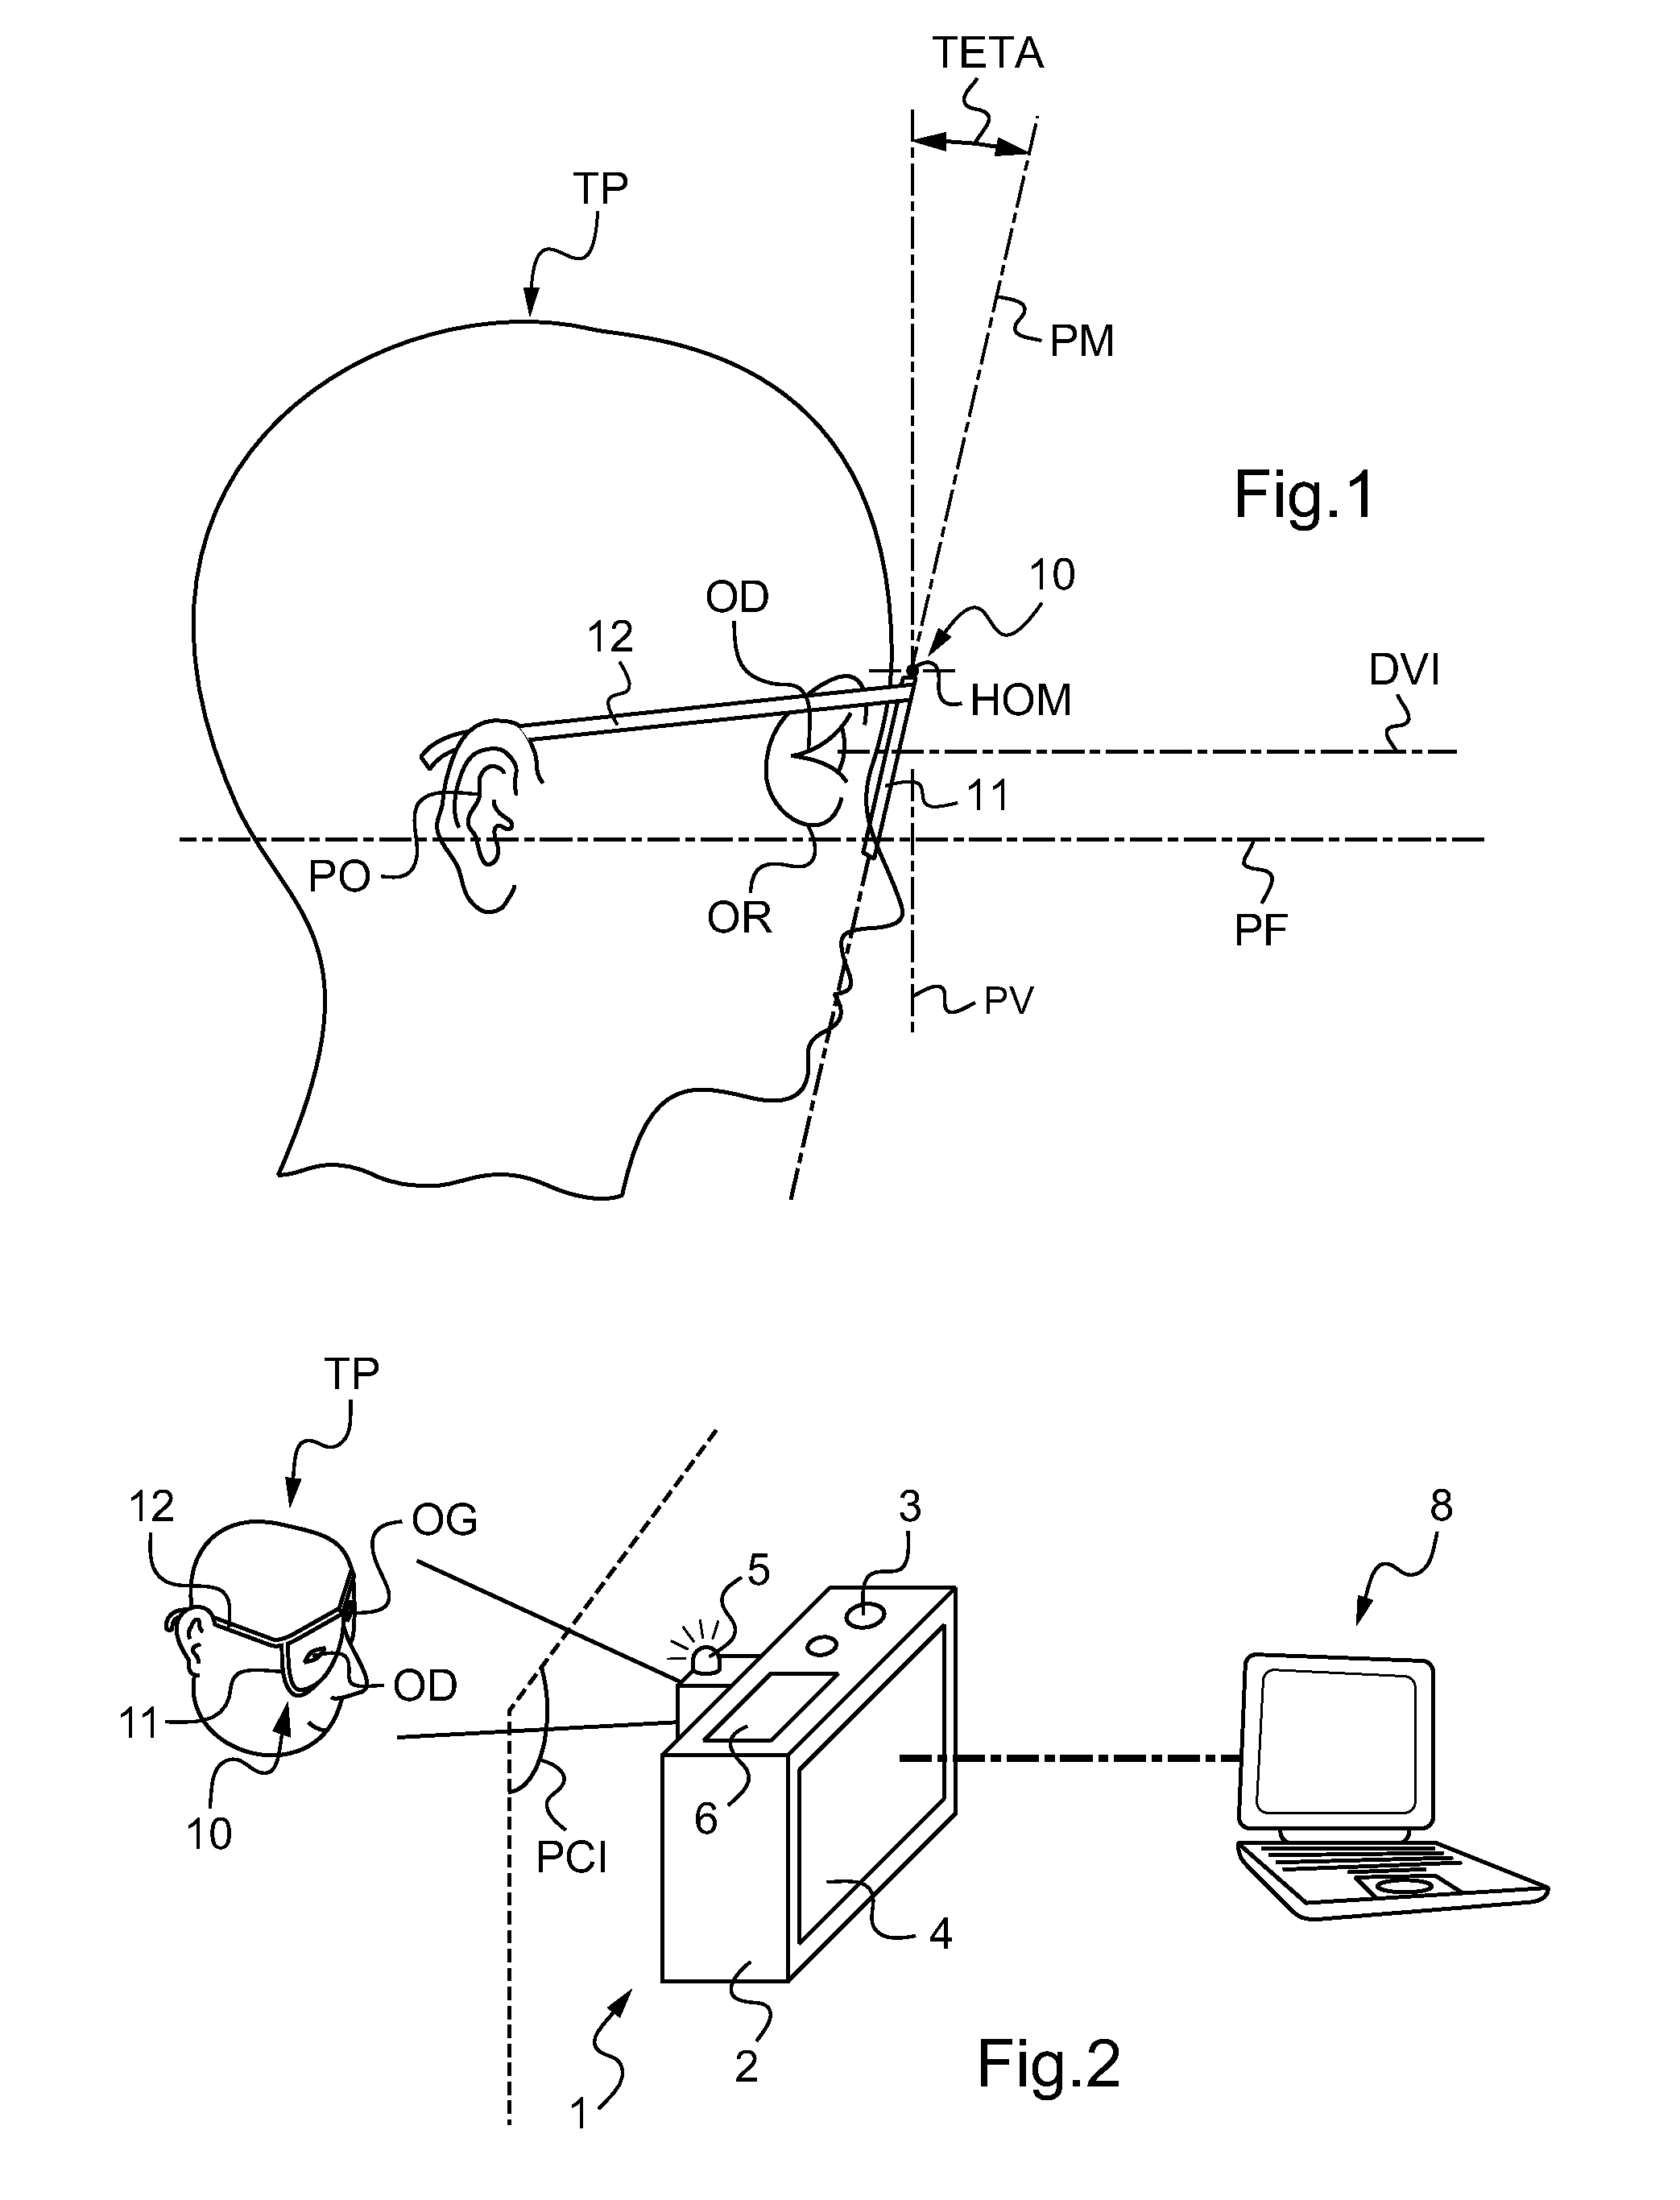 Method of measuring at least one geometrico-physiognomic parameter for positioning a vision correcting eyeglass frame on the face of a wearer